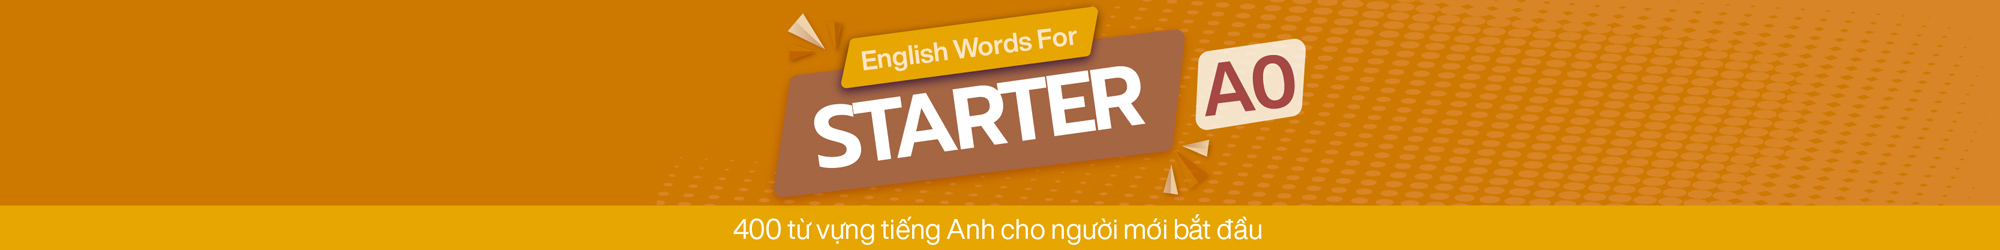 English Words For Starter (A0)